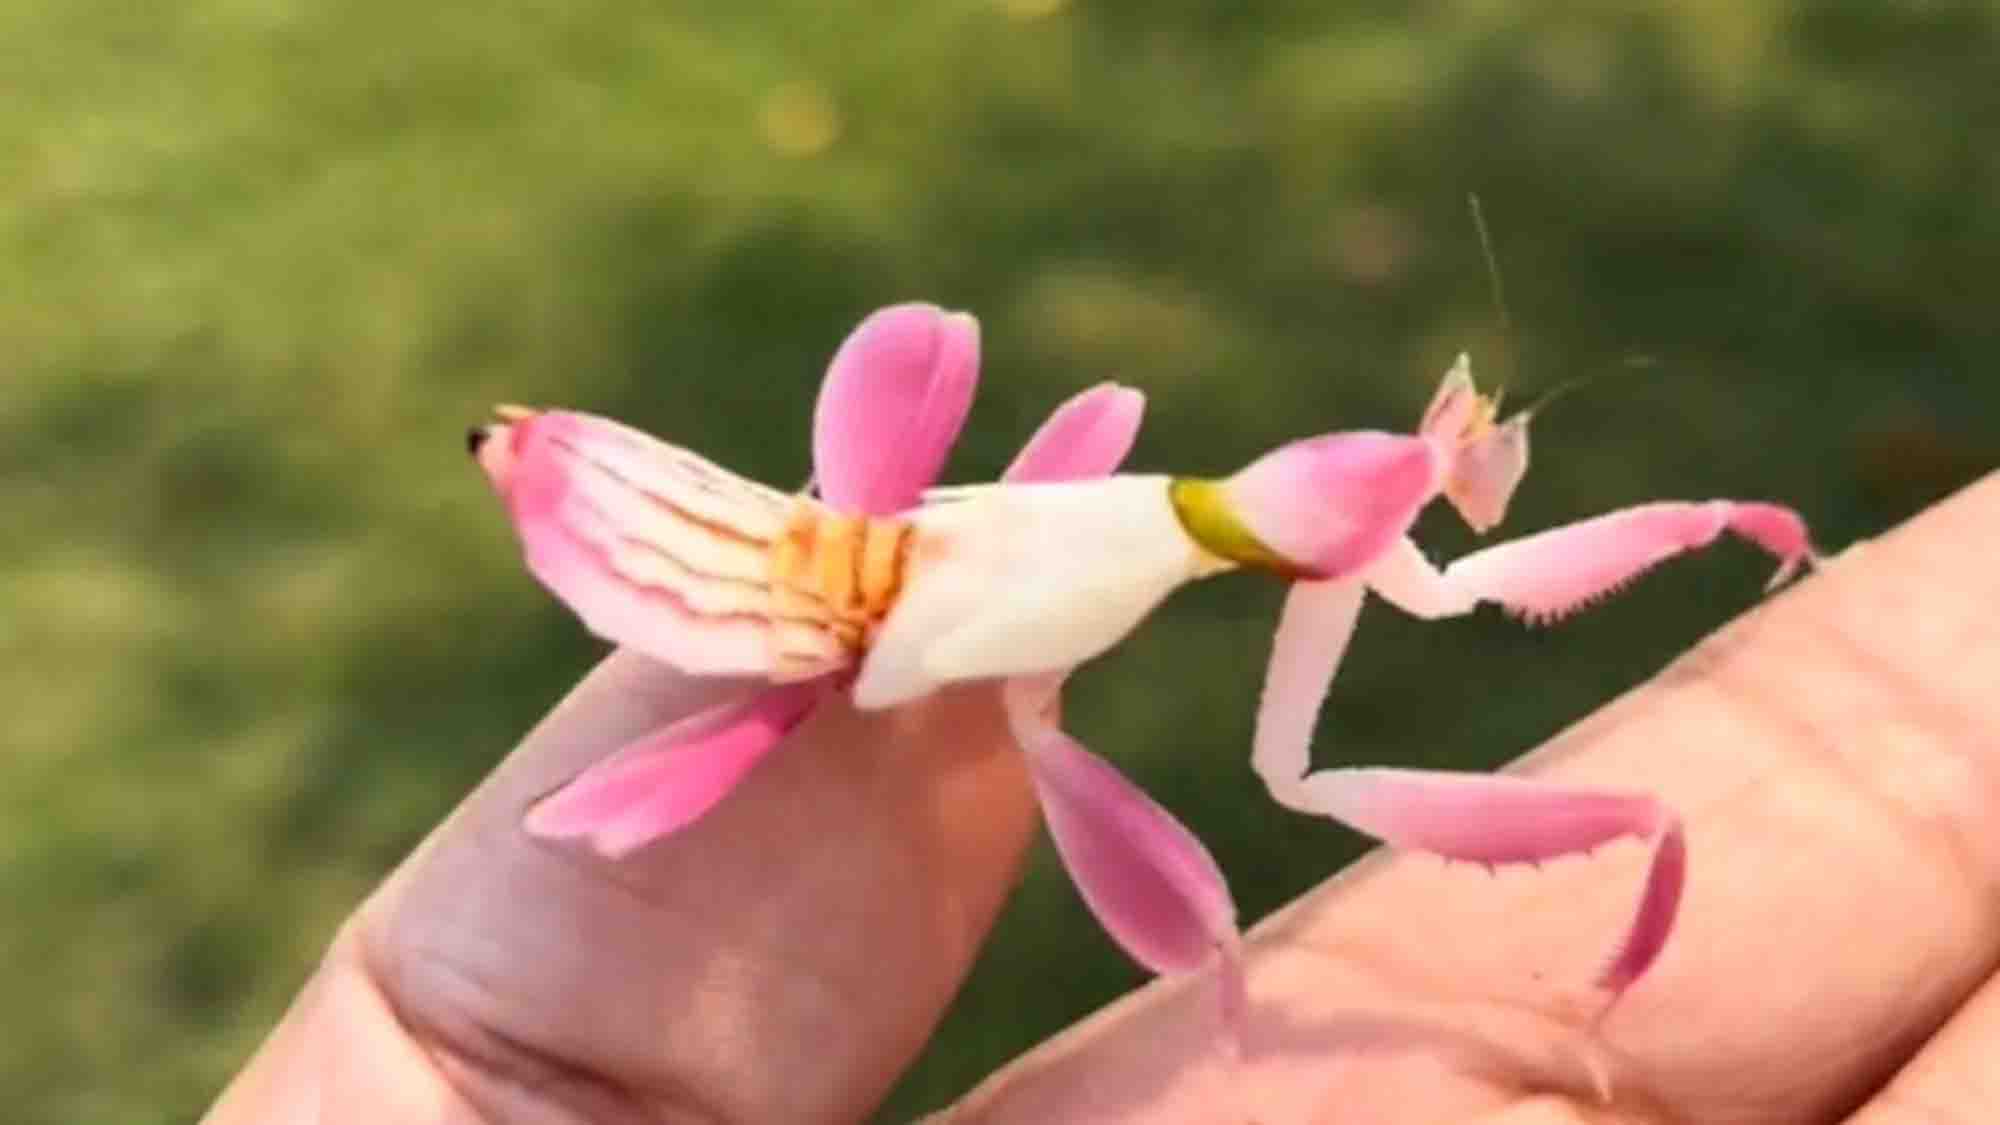 Mesmerising Moment Vibrant Orchid Mantis Delicately Moves On Individual’s Palm